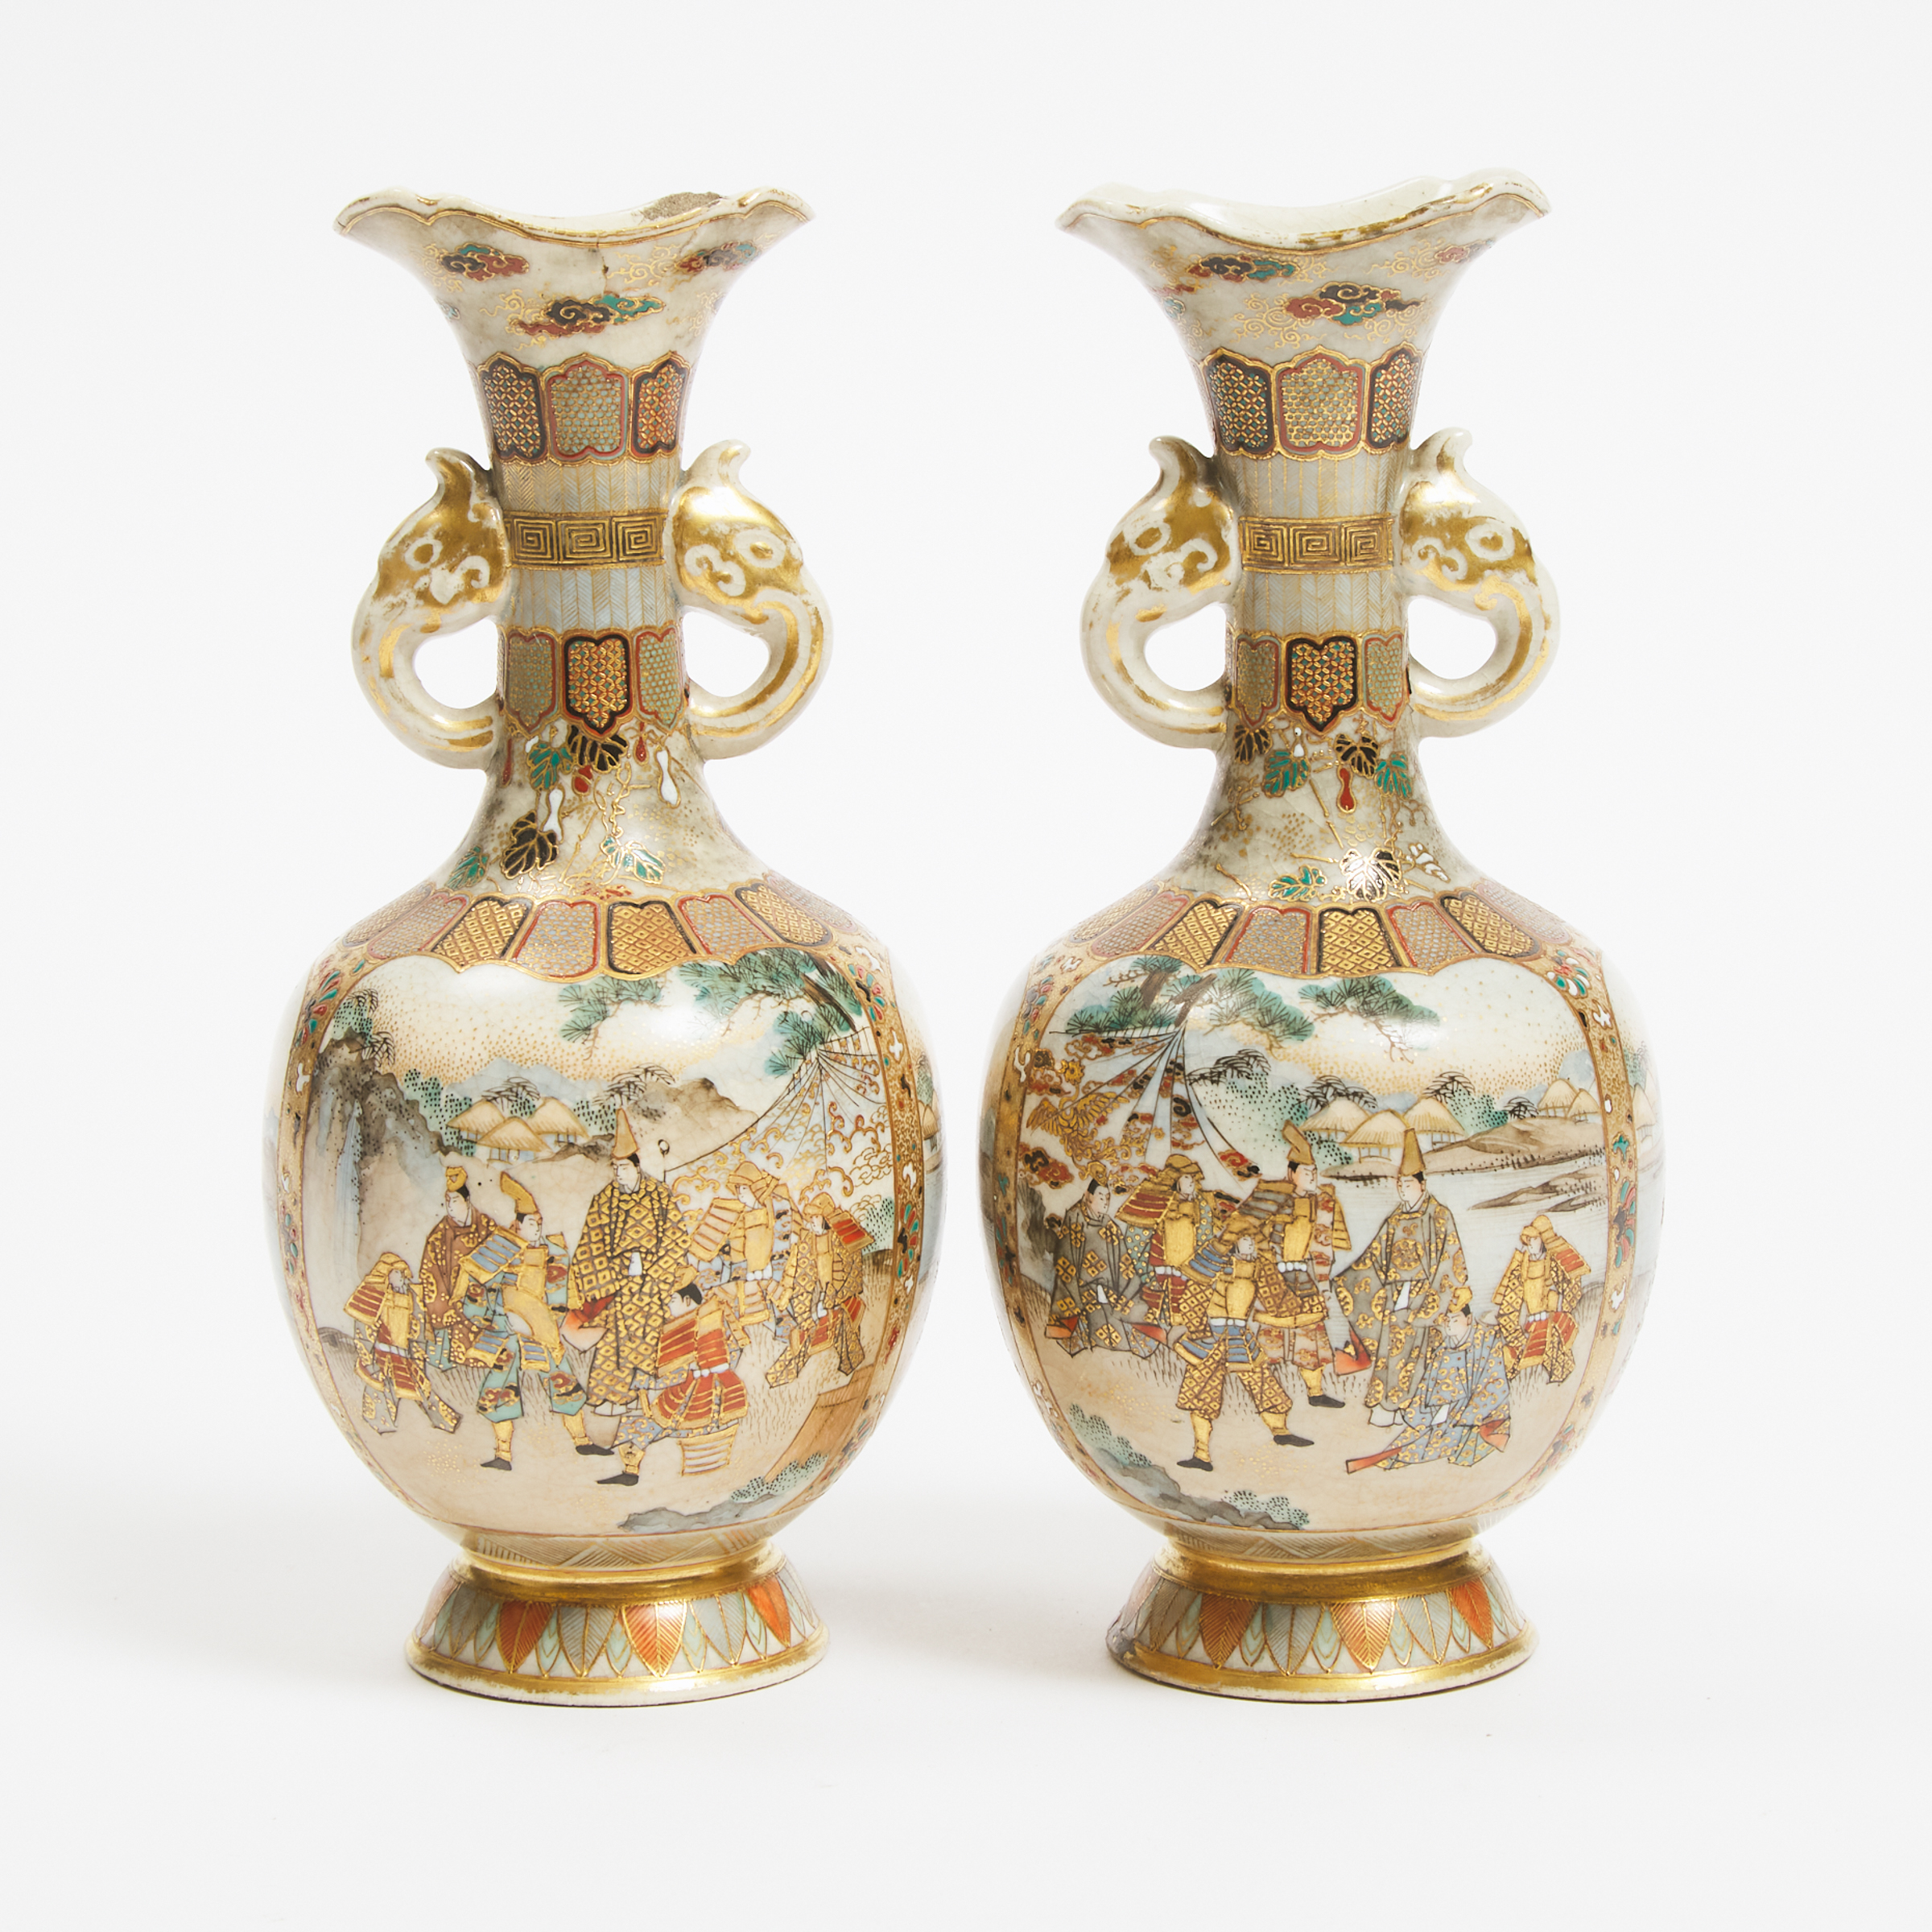 A Pair of Small Satsuma 'Figural' Vases, Signed, Meiji Period (1868-1912)